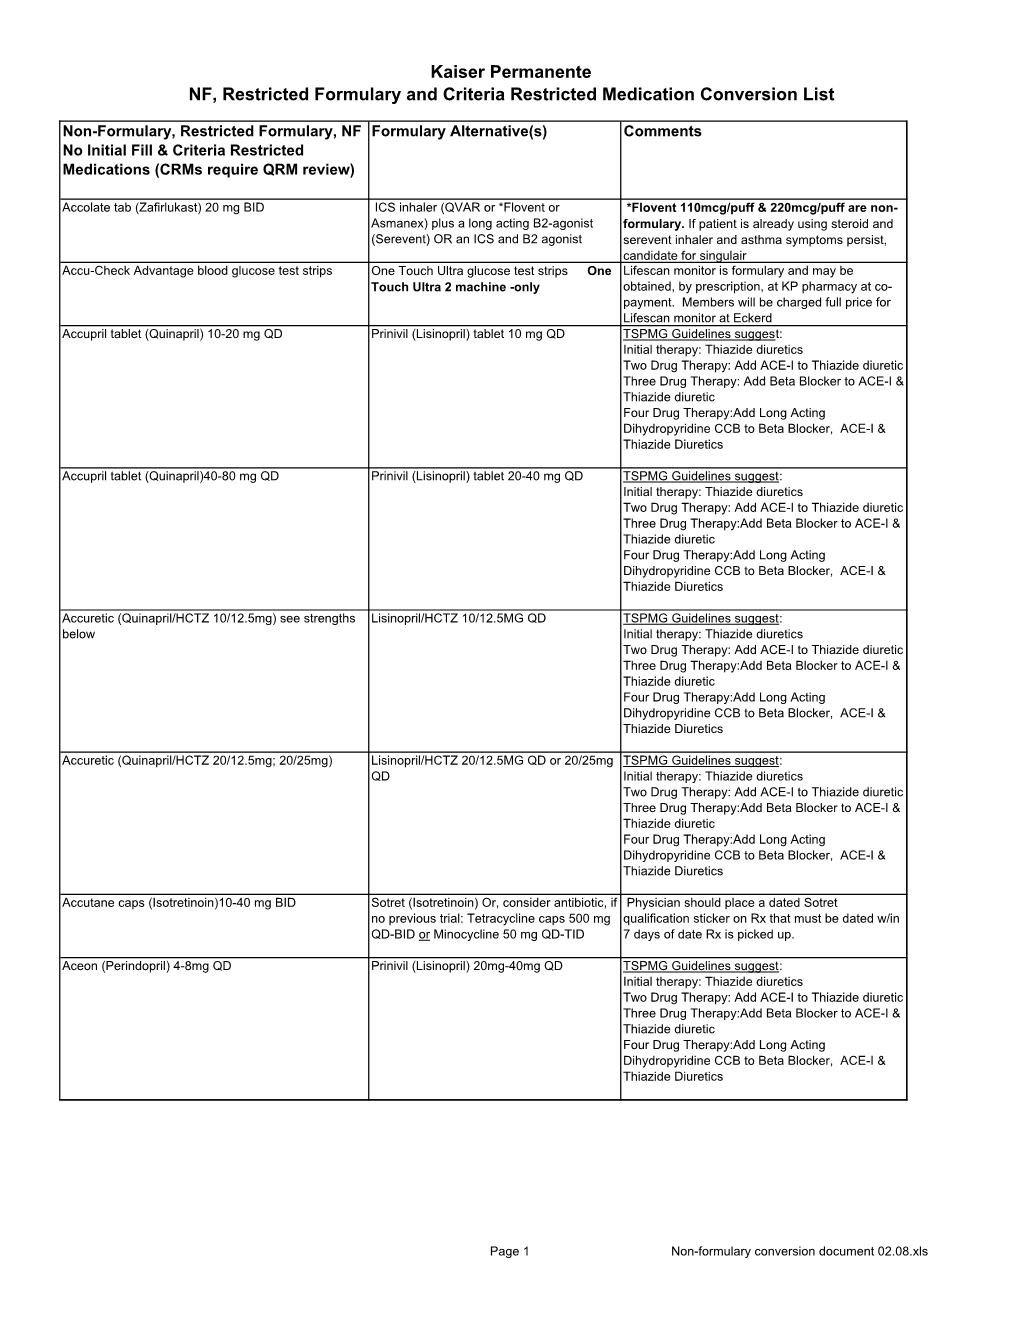 Non-Formulary Conversion Document 02.08.Xls Kaiser Permanente NF, Restricted Formulary and Criteria Restricted Medication Conversion List